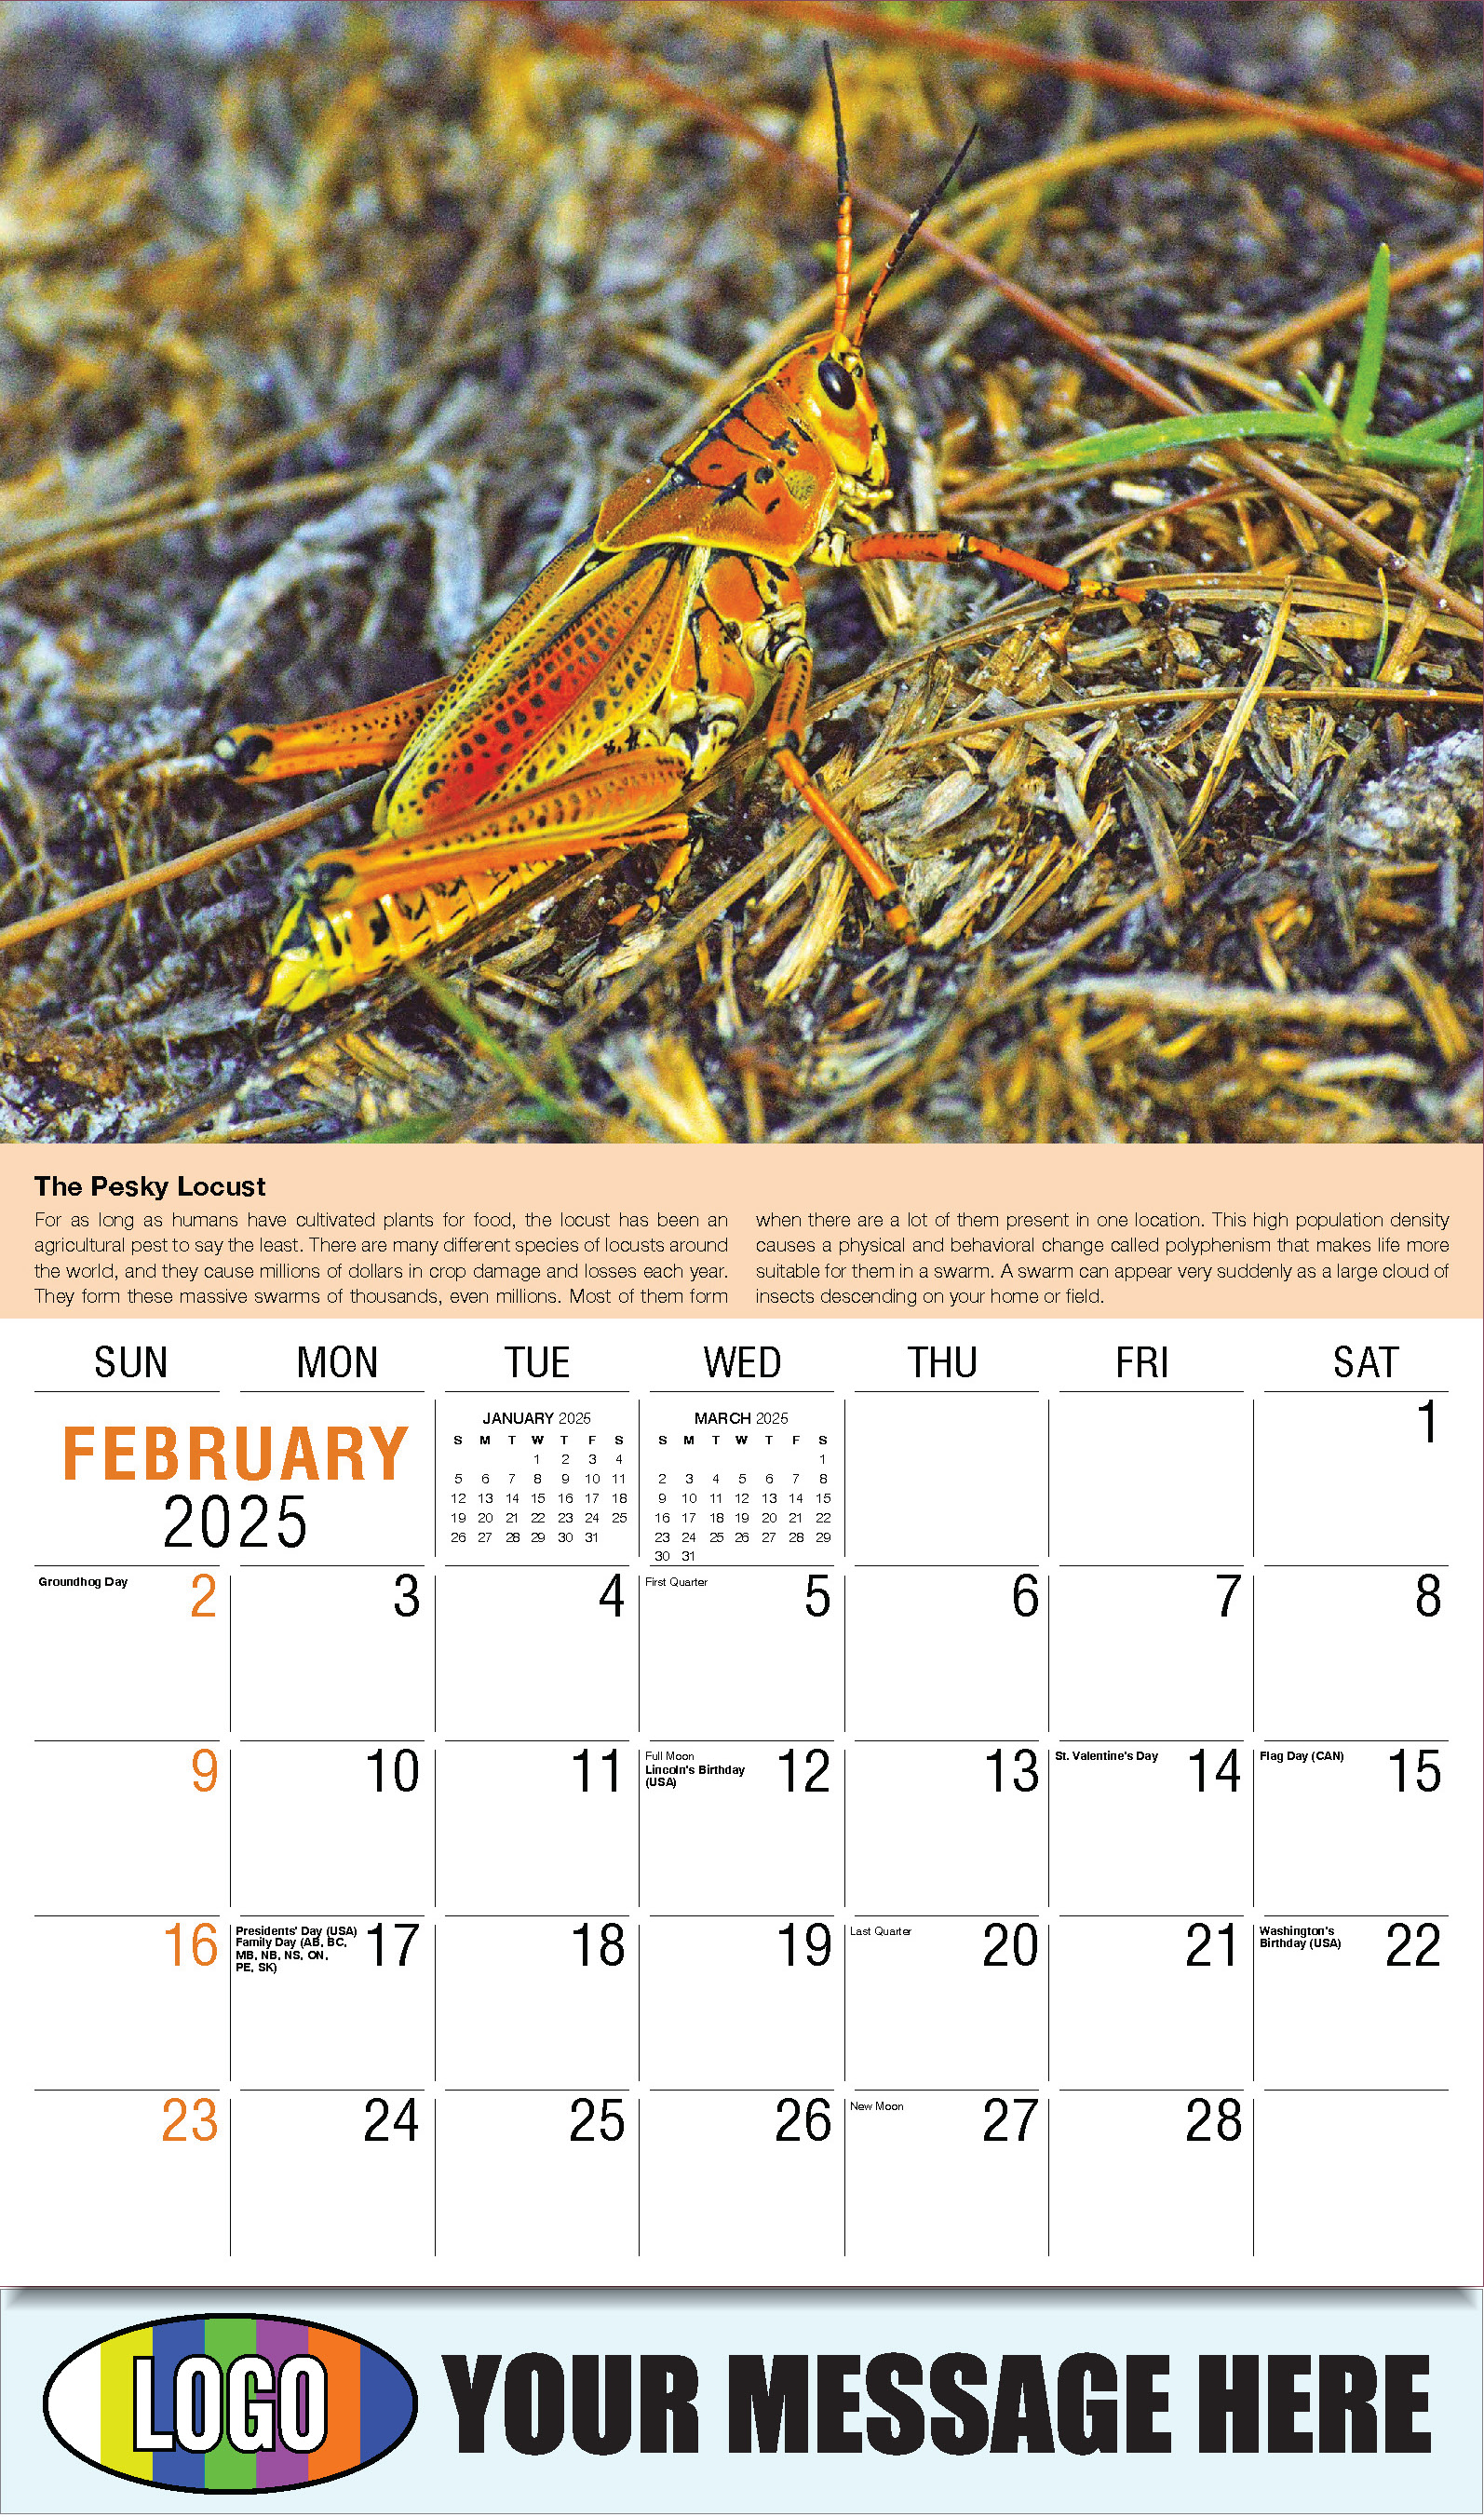 Planet Earth 2025 Business Promotional Wall Calendar - February